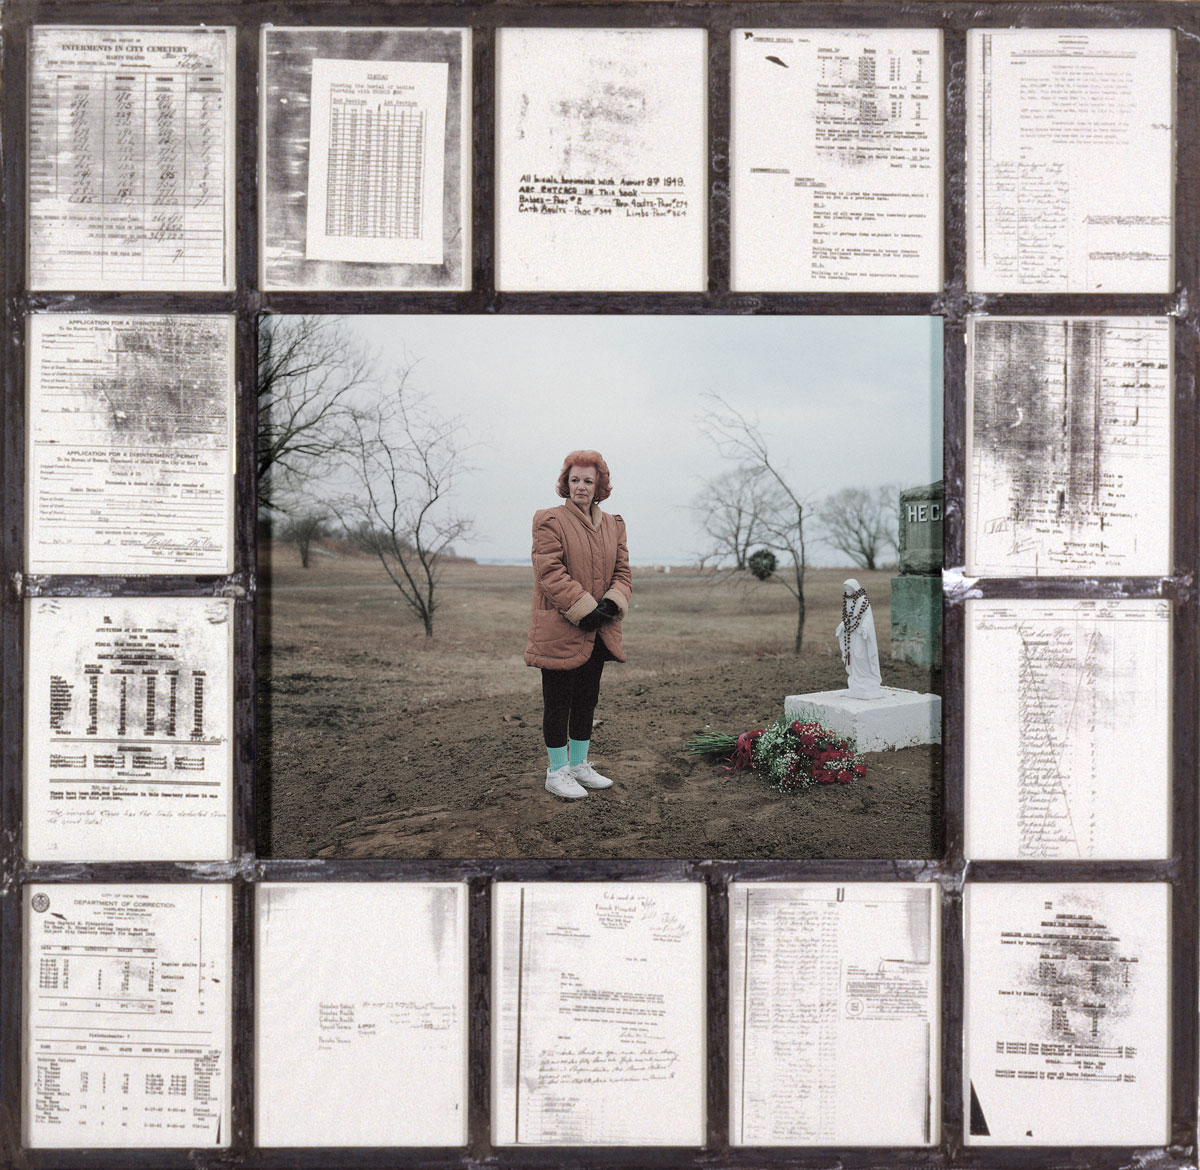 A page from the 1998 book Hart Island showing an installation by Melinda that includes Joel Sternfeld’s large-format photograph of Vicki Pavia, whose baby is buried on Hart Island.